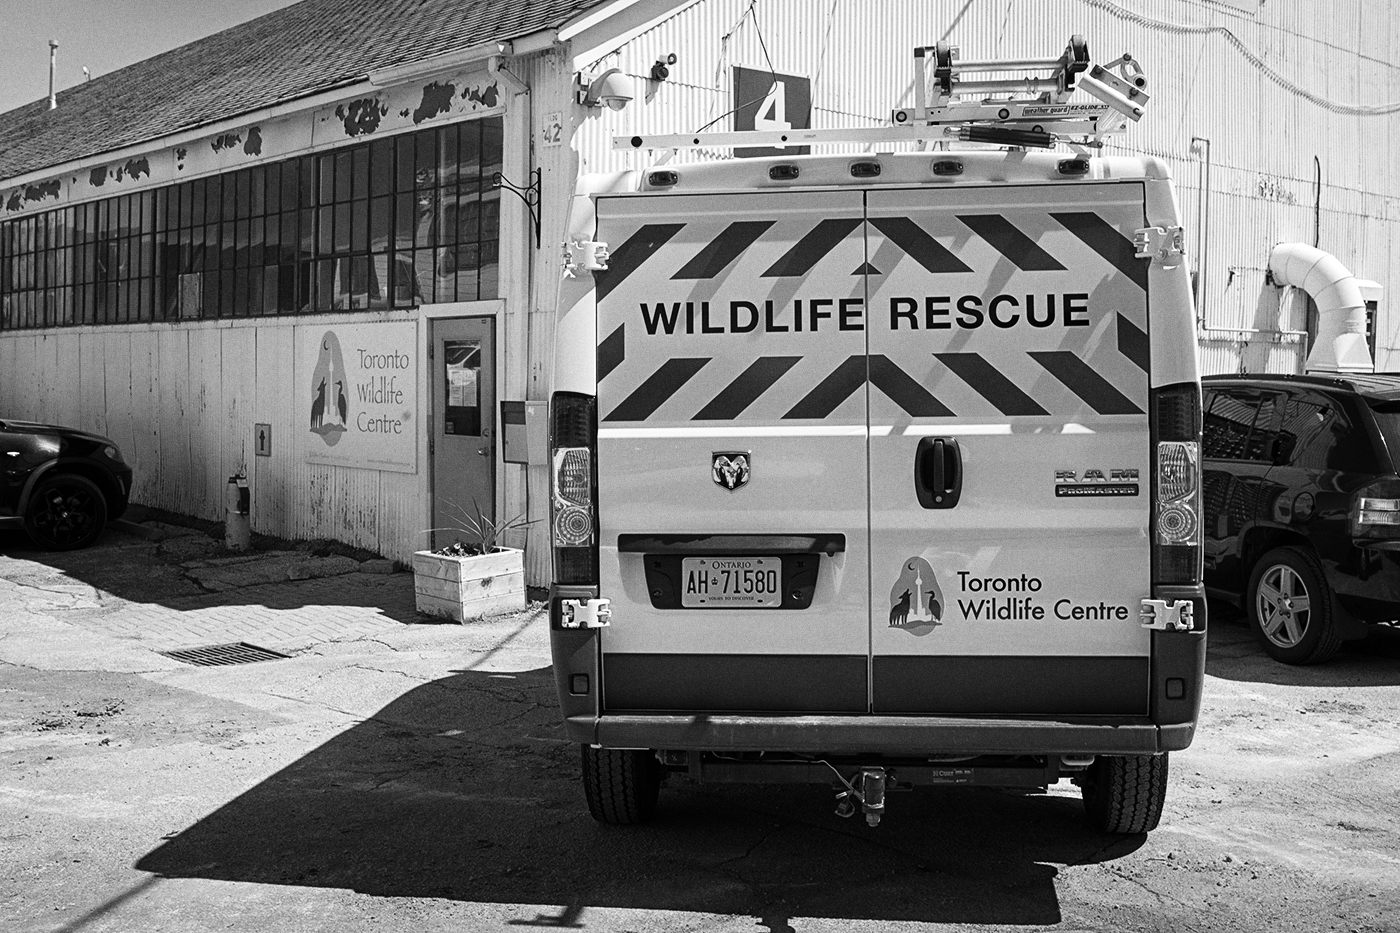 A van with a sign on it reading "Wildlife Rescue" at the Toronto Wildlife Centre